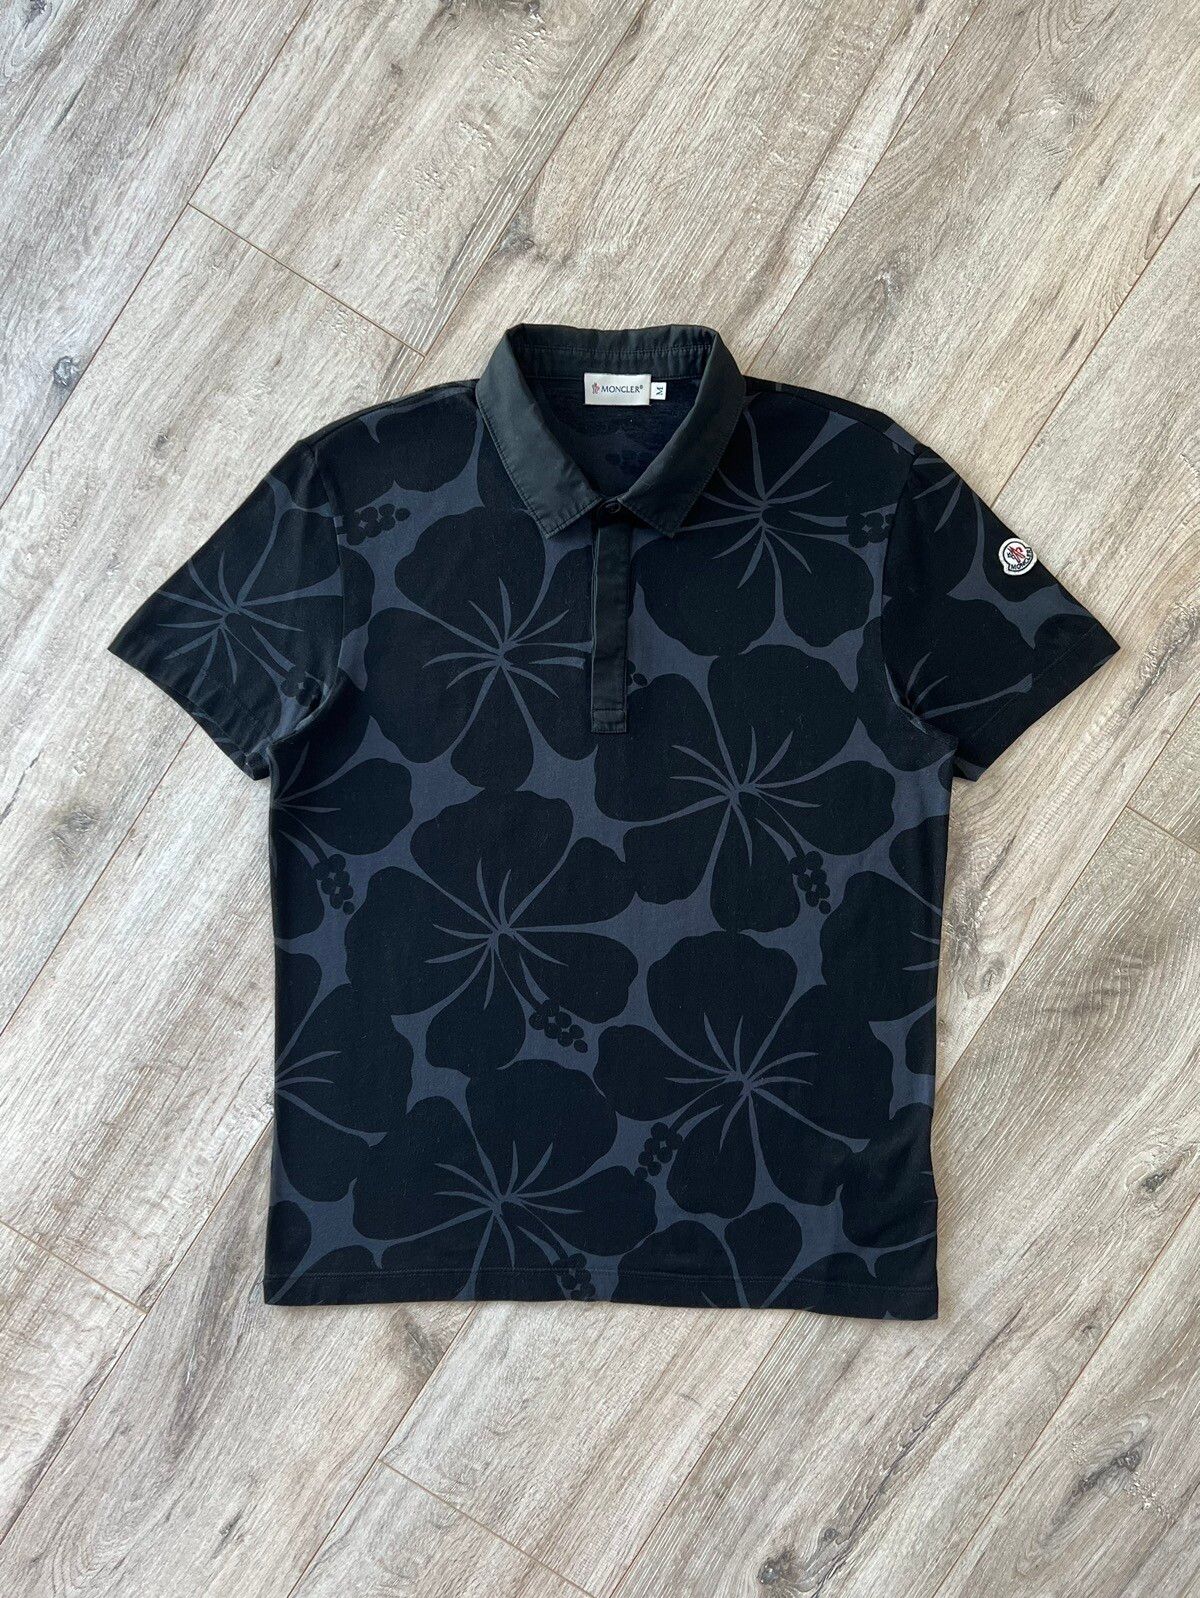 Pre-owned Moncler Polo Shirt Cotton Hawaiian Pattern Logo Patch In Black/gray